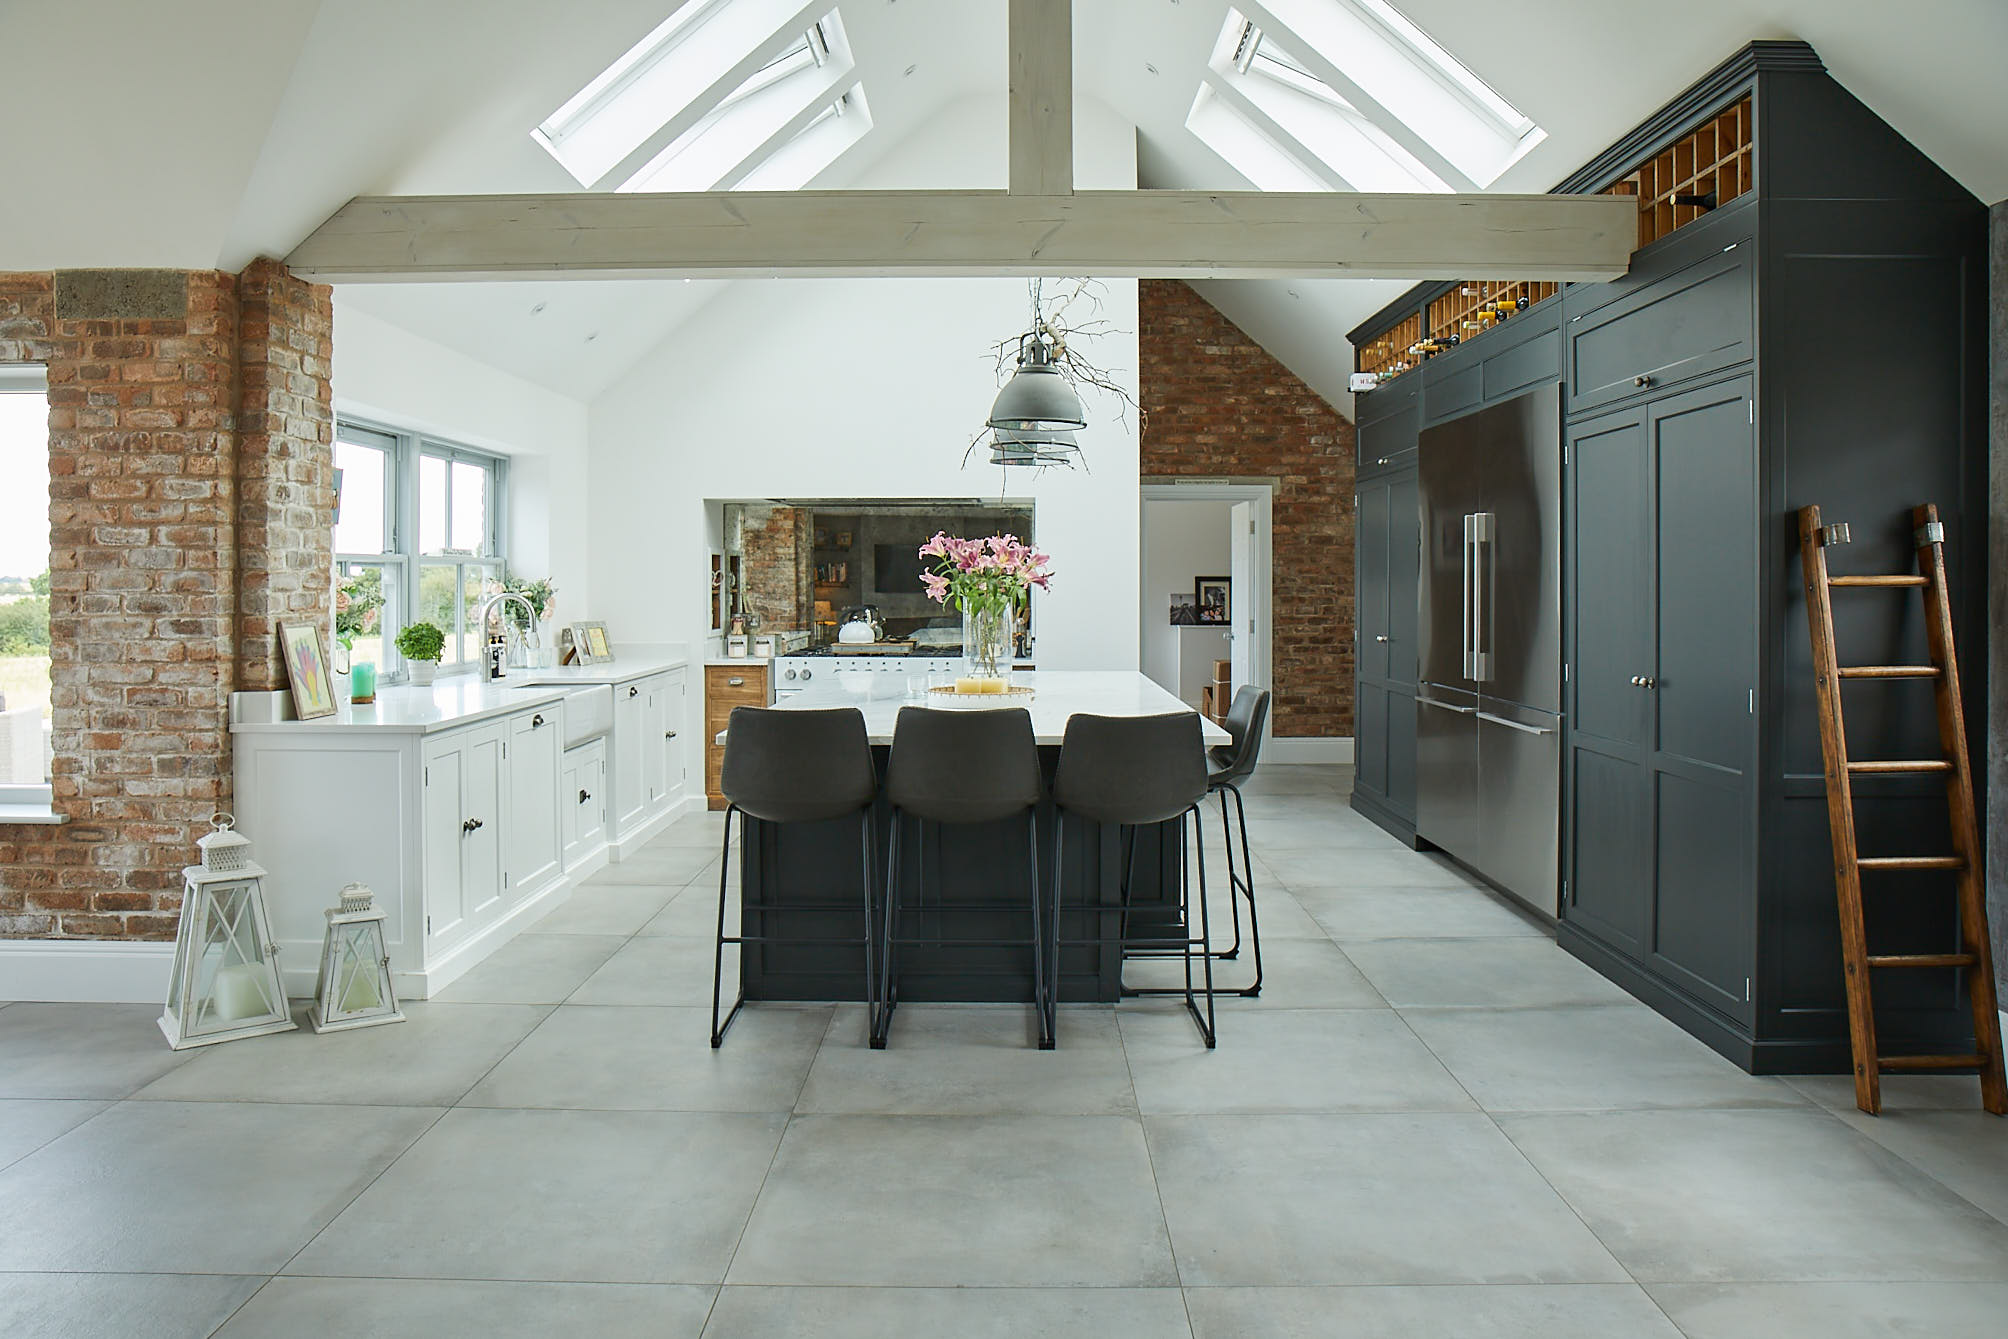 Lamp black kitchen units with leather barstools